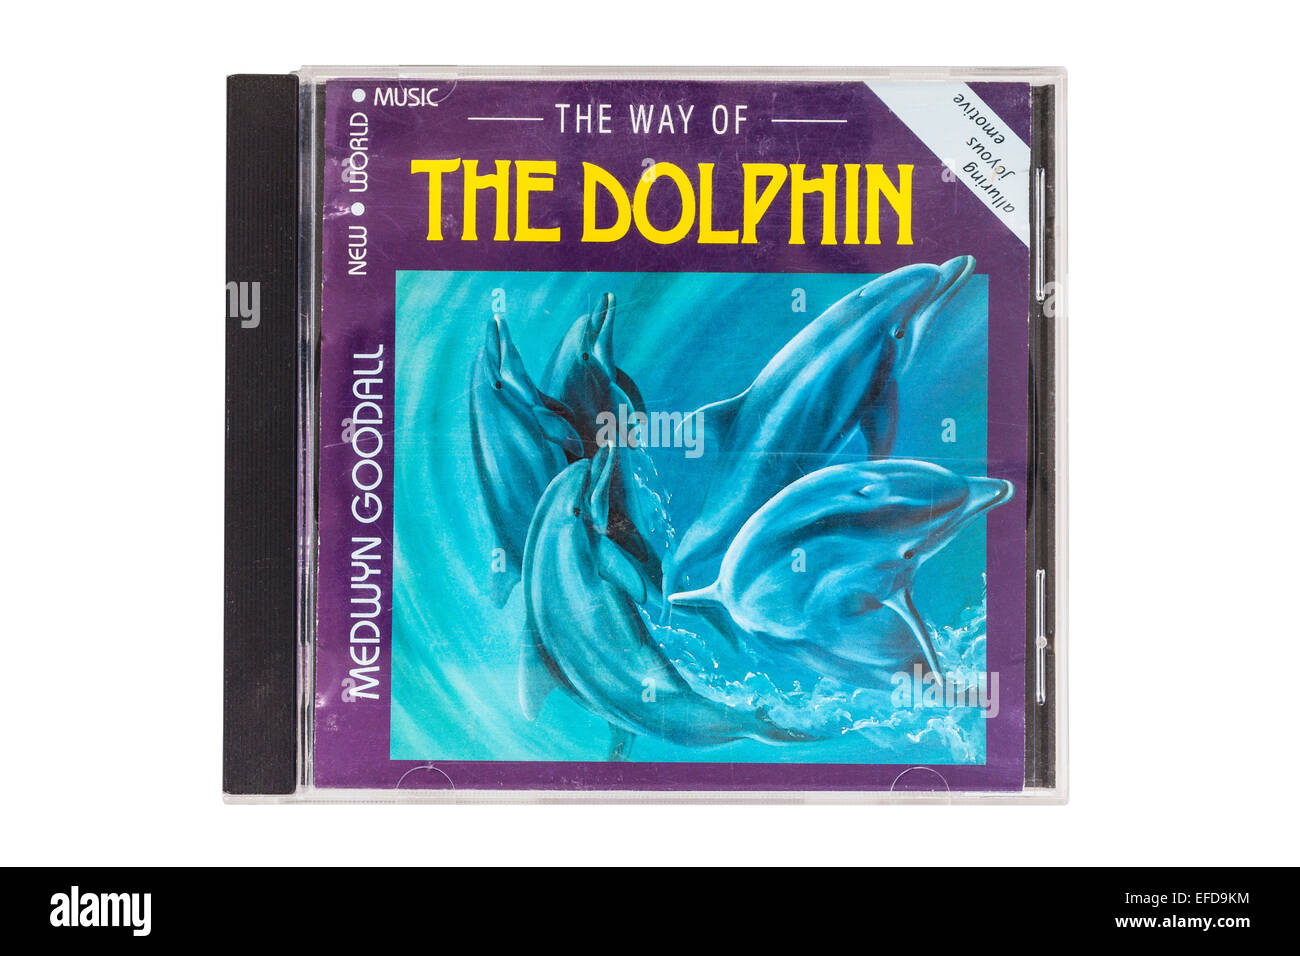 The Way of the Dolphin Music CD on a white background Stock Photo